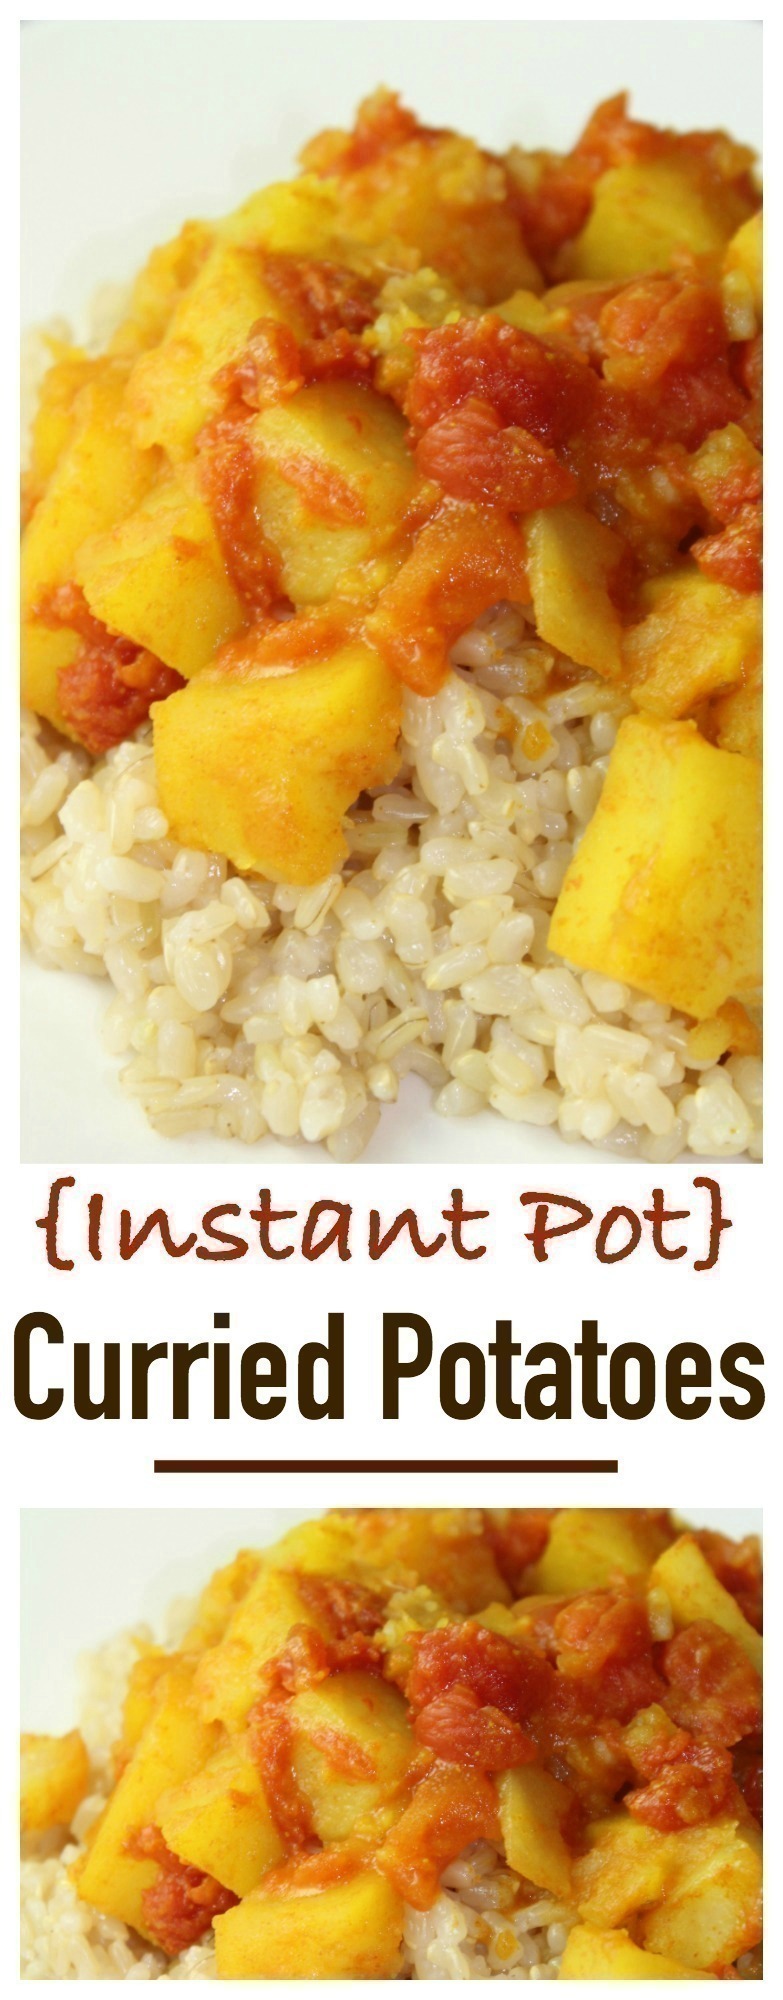 Instant Pot Curried Potatoes